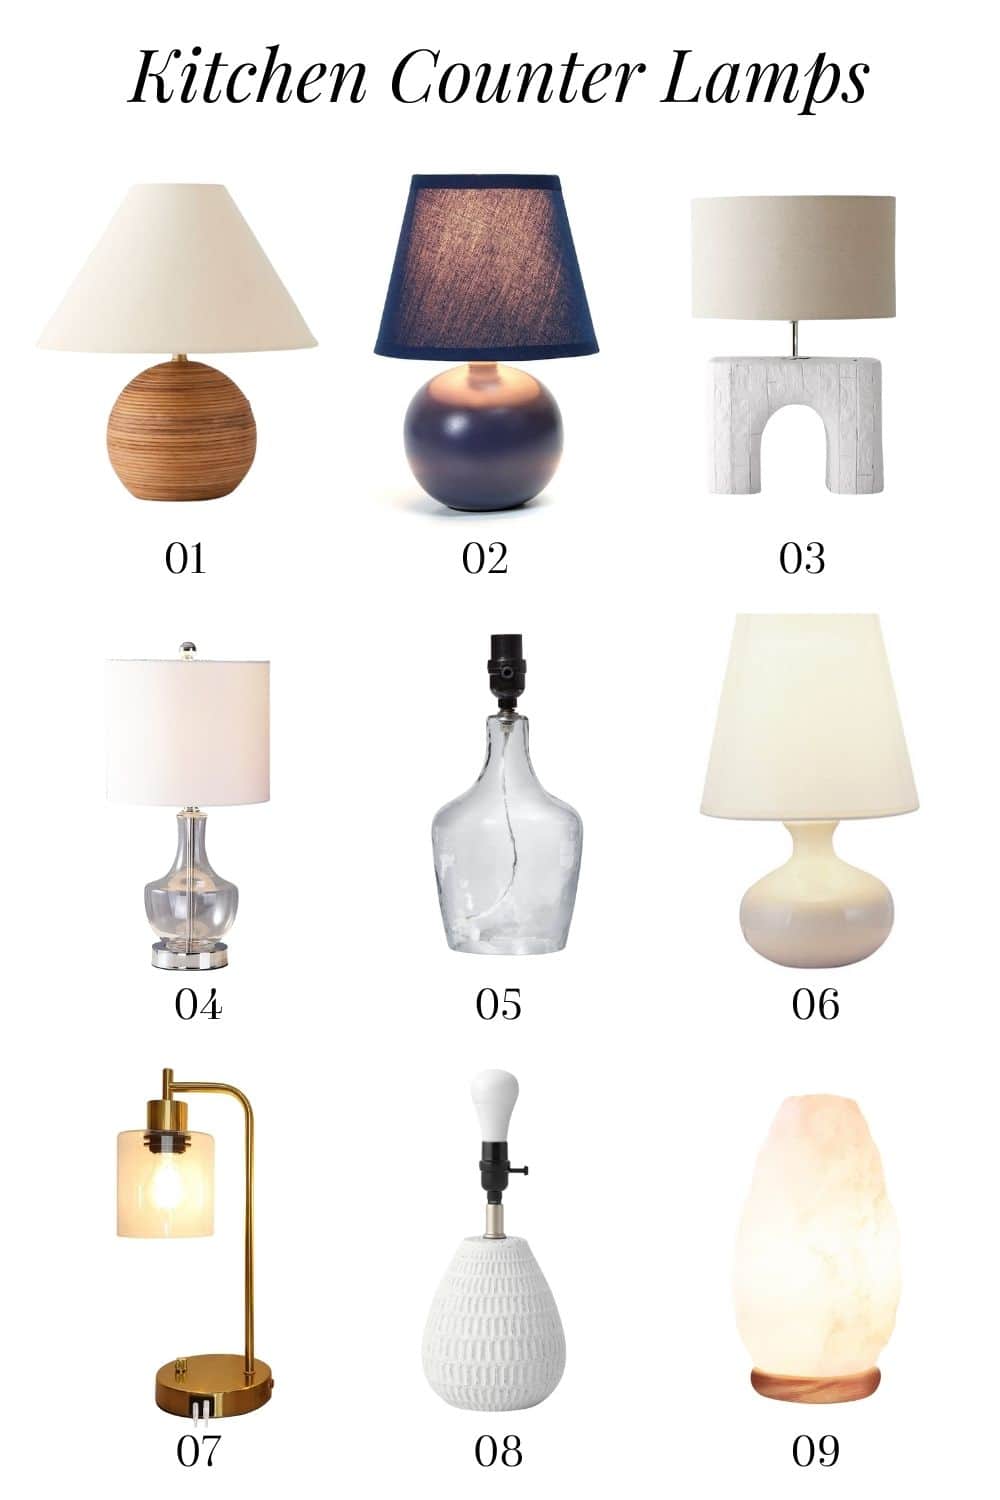 Roundup of kitchen counter lamps